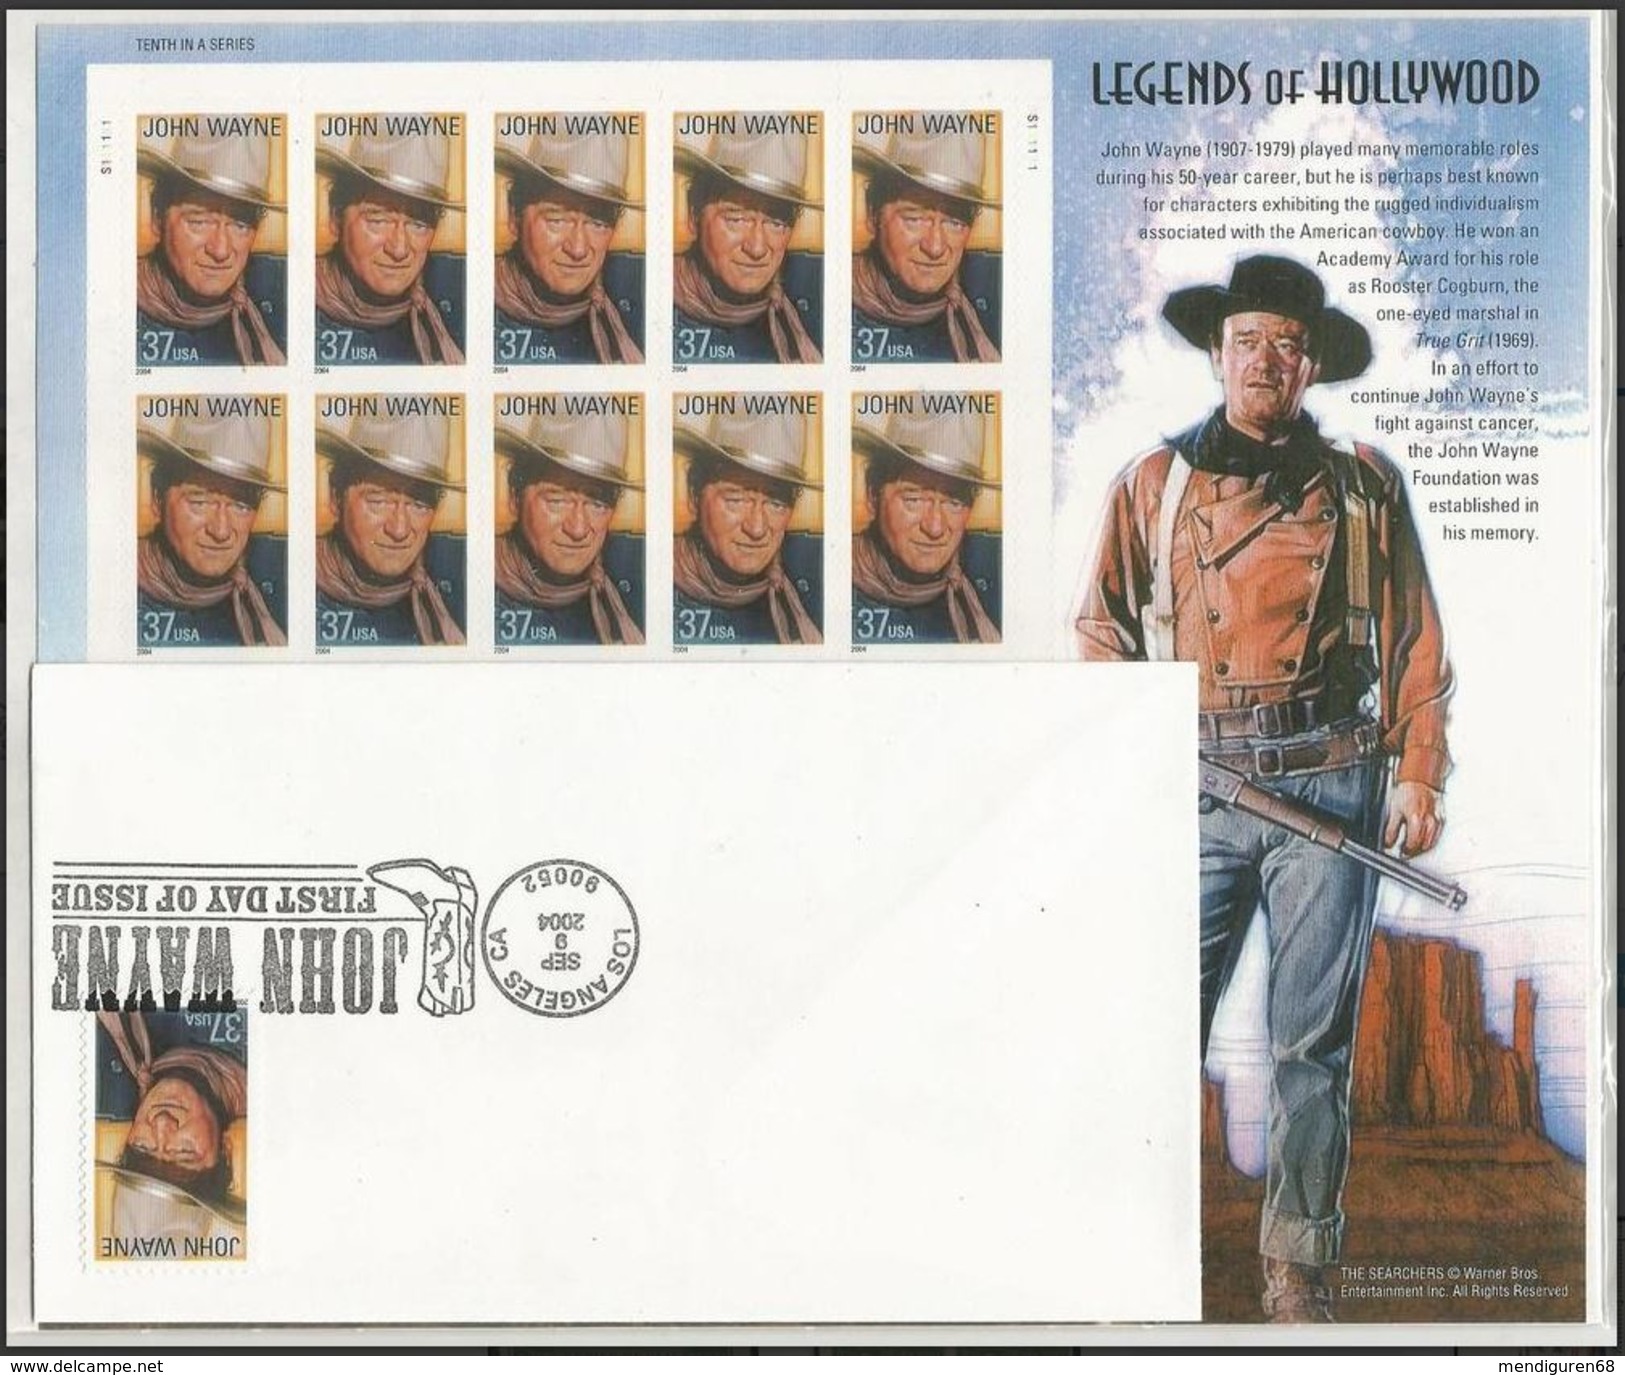 VERINIGTE STAATEN USA 2004 JOHN WAYNE MS Of 20V. WITH FDC SC 3876sp YV BF3585  MI B-3864 SG MS4379 - Feuilles Complètes